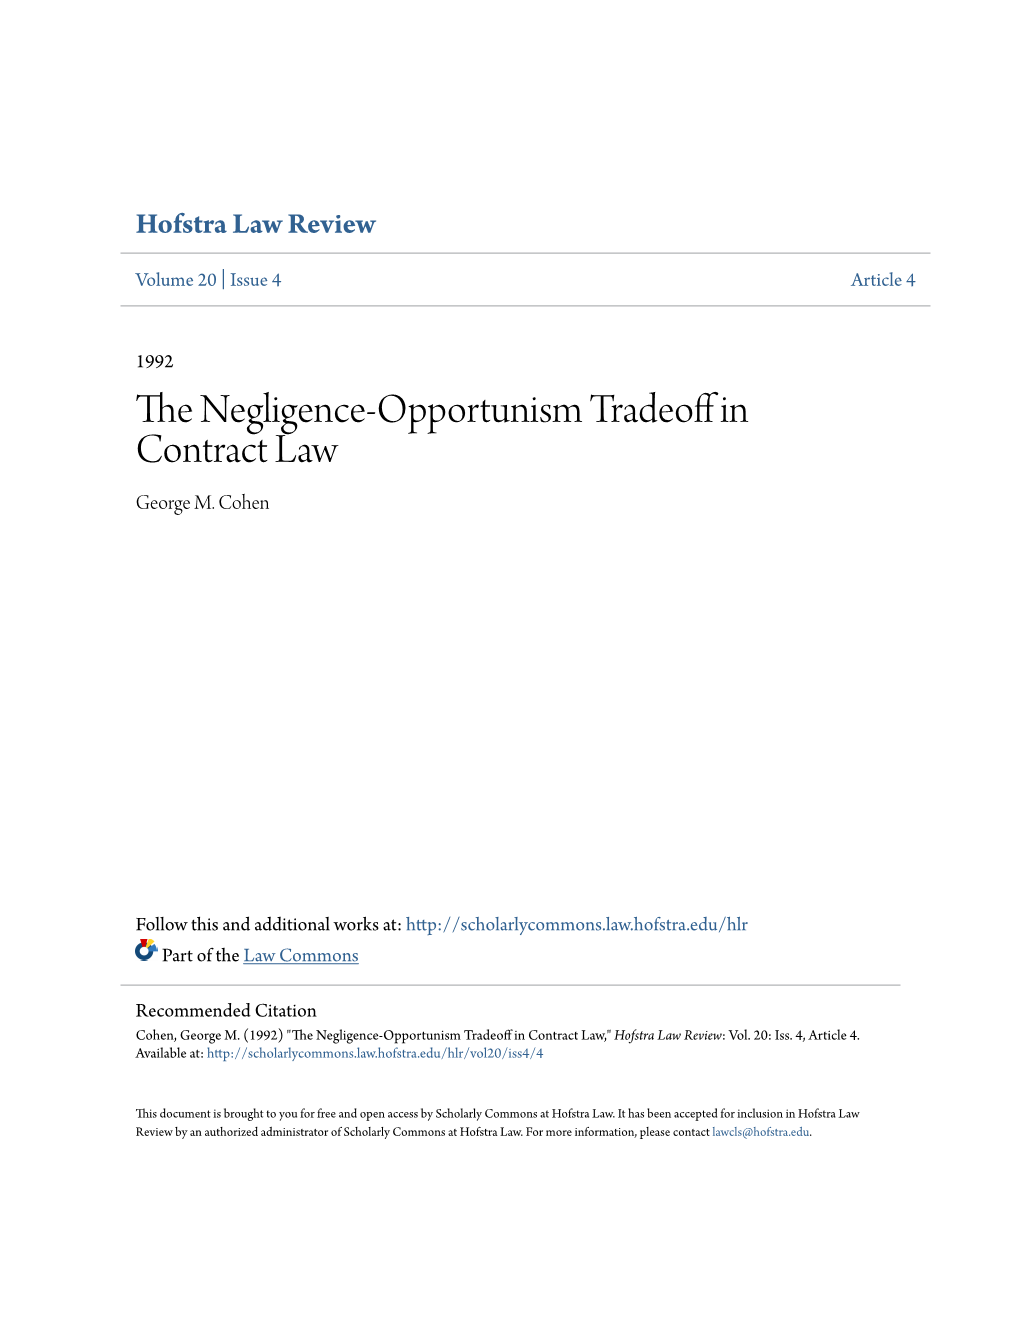 The Negligence-Opportunism Tradeoff in Contract Law